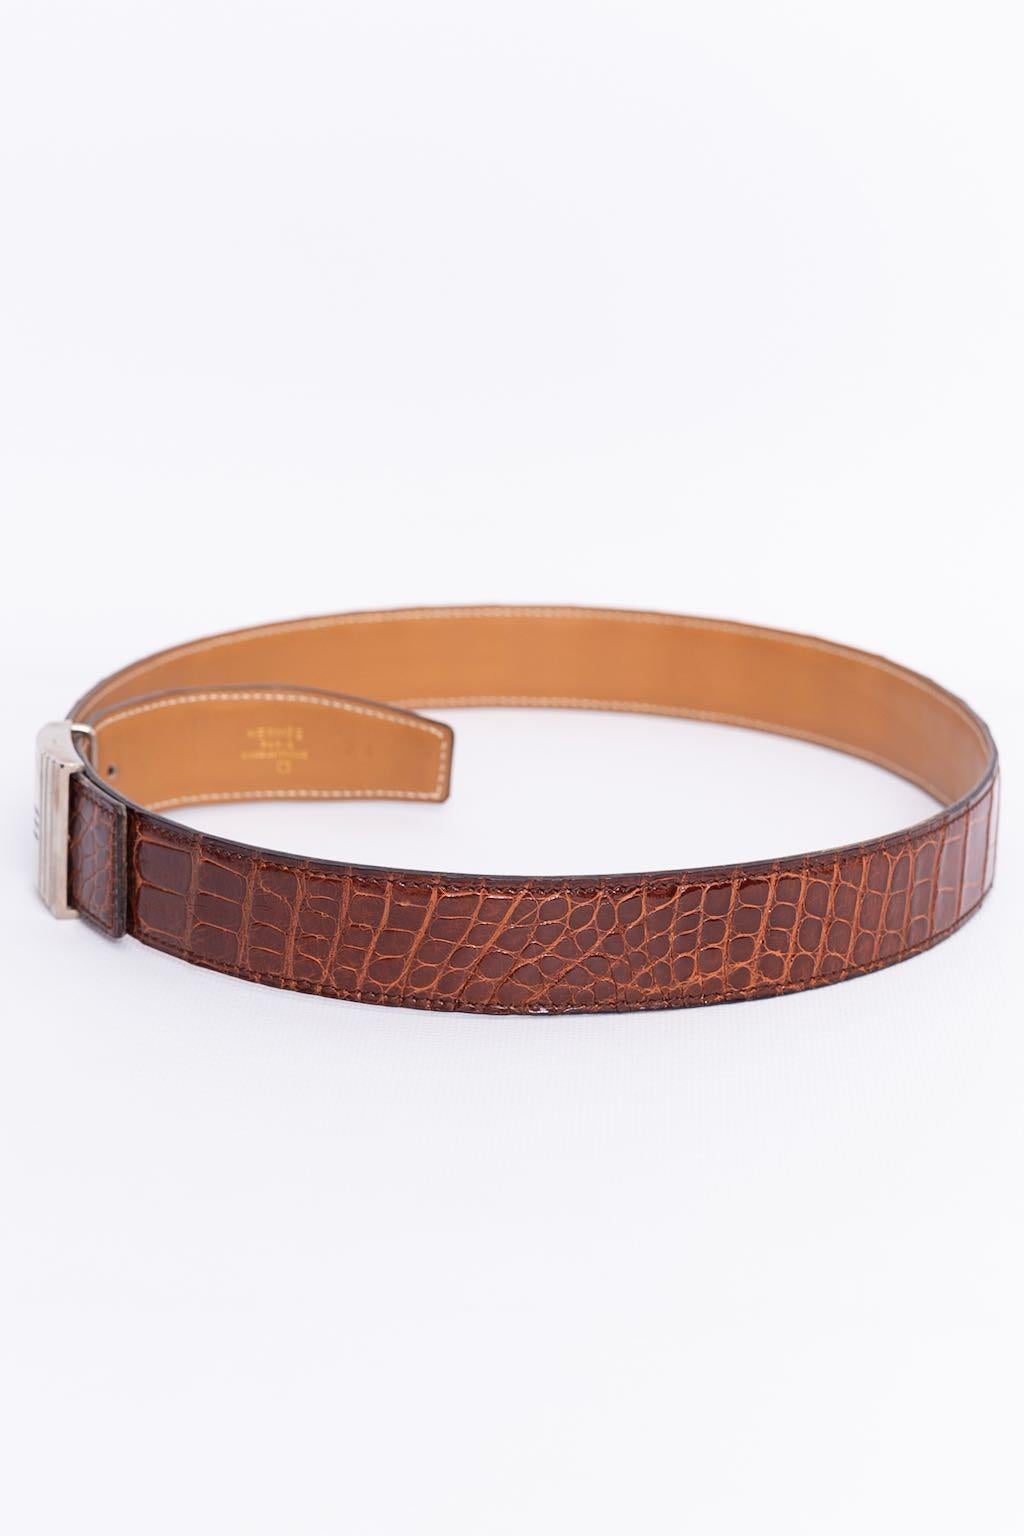 Hermes (Made in France) Belt composed of crocodile and brown leather. Indicated size 76 - 5C.

Additional information: 
Dimensions: Length: 88 cm (34.64